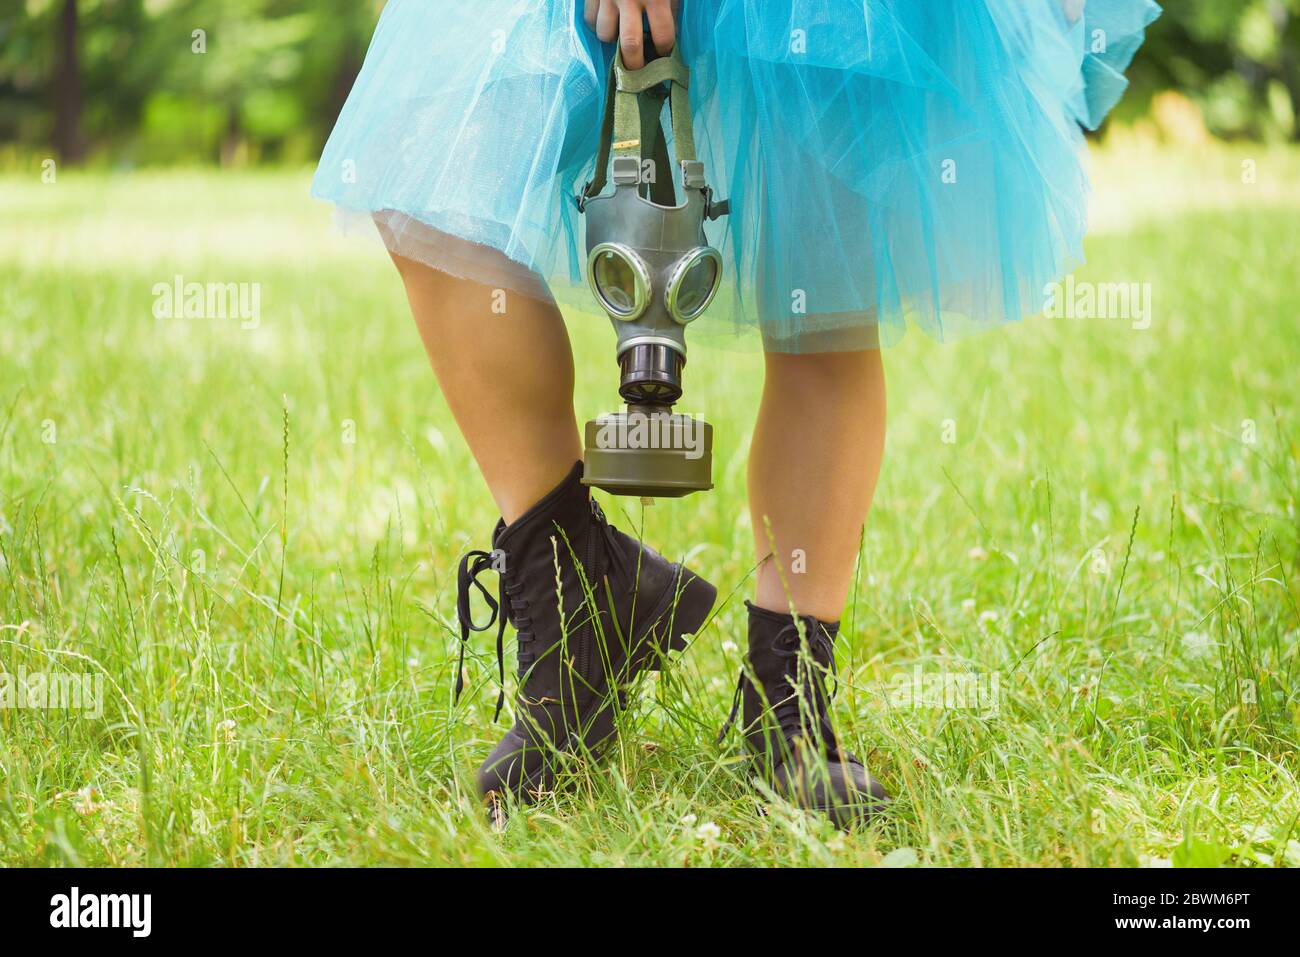 Woman in blue skirt with gas mask standing on green grass in a park. Environmental protection, biohazard and ecological concept Stock Photo